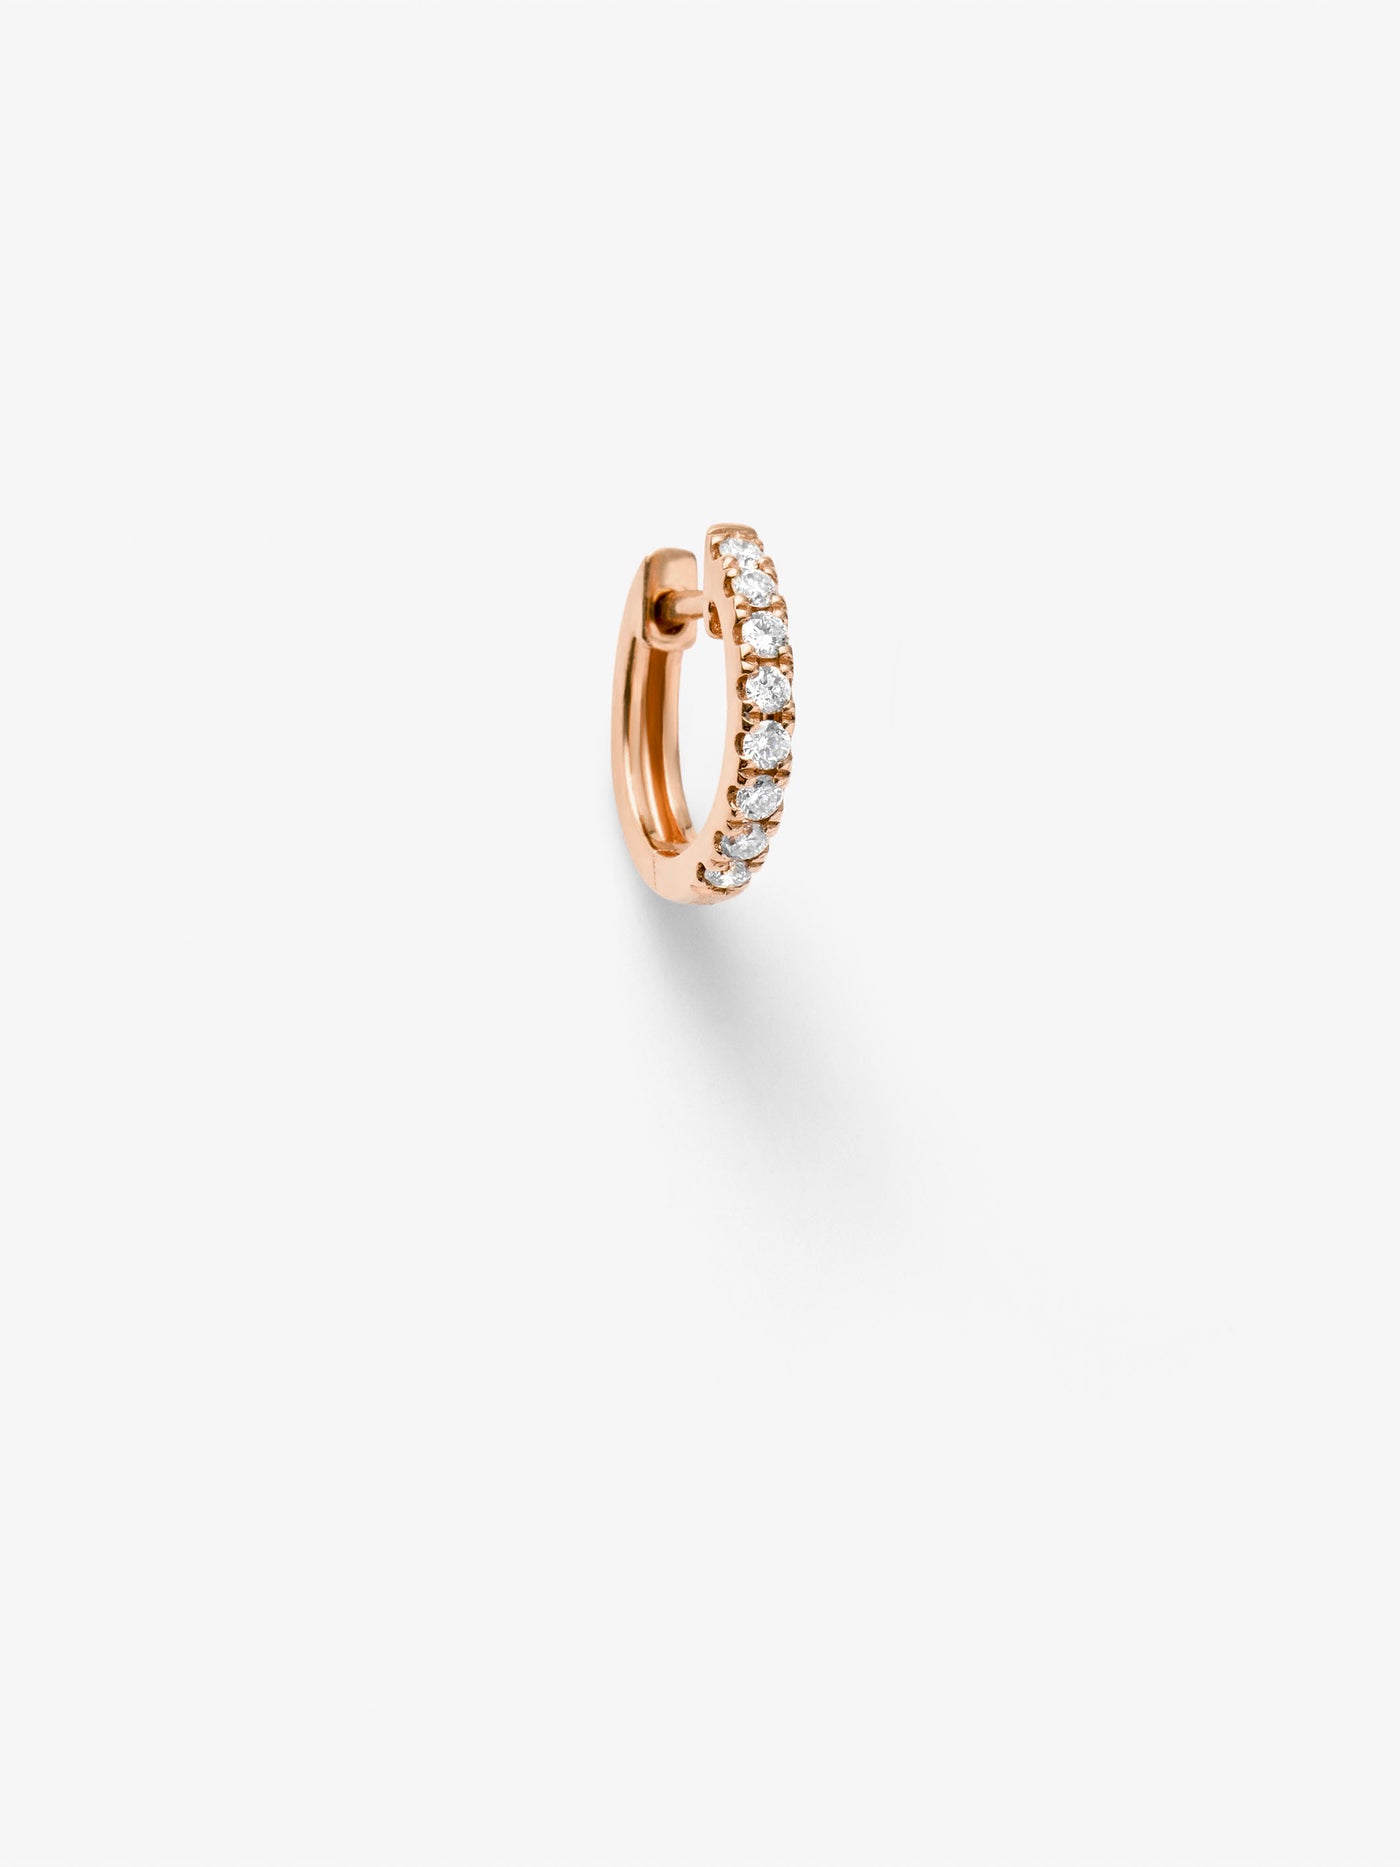 Huggie diamond earrings in 18k solid rose gold, are hinged for easy on and off